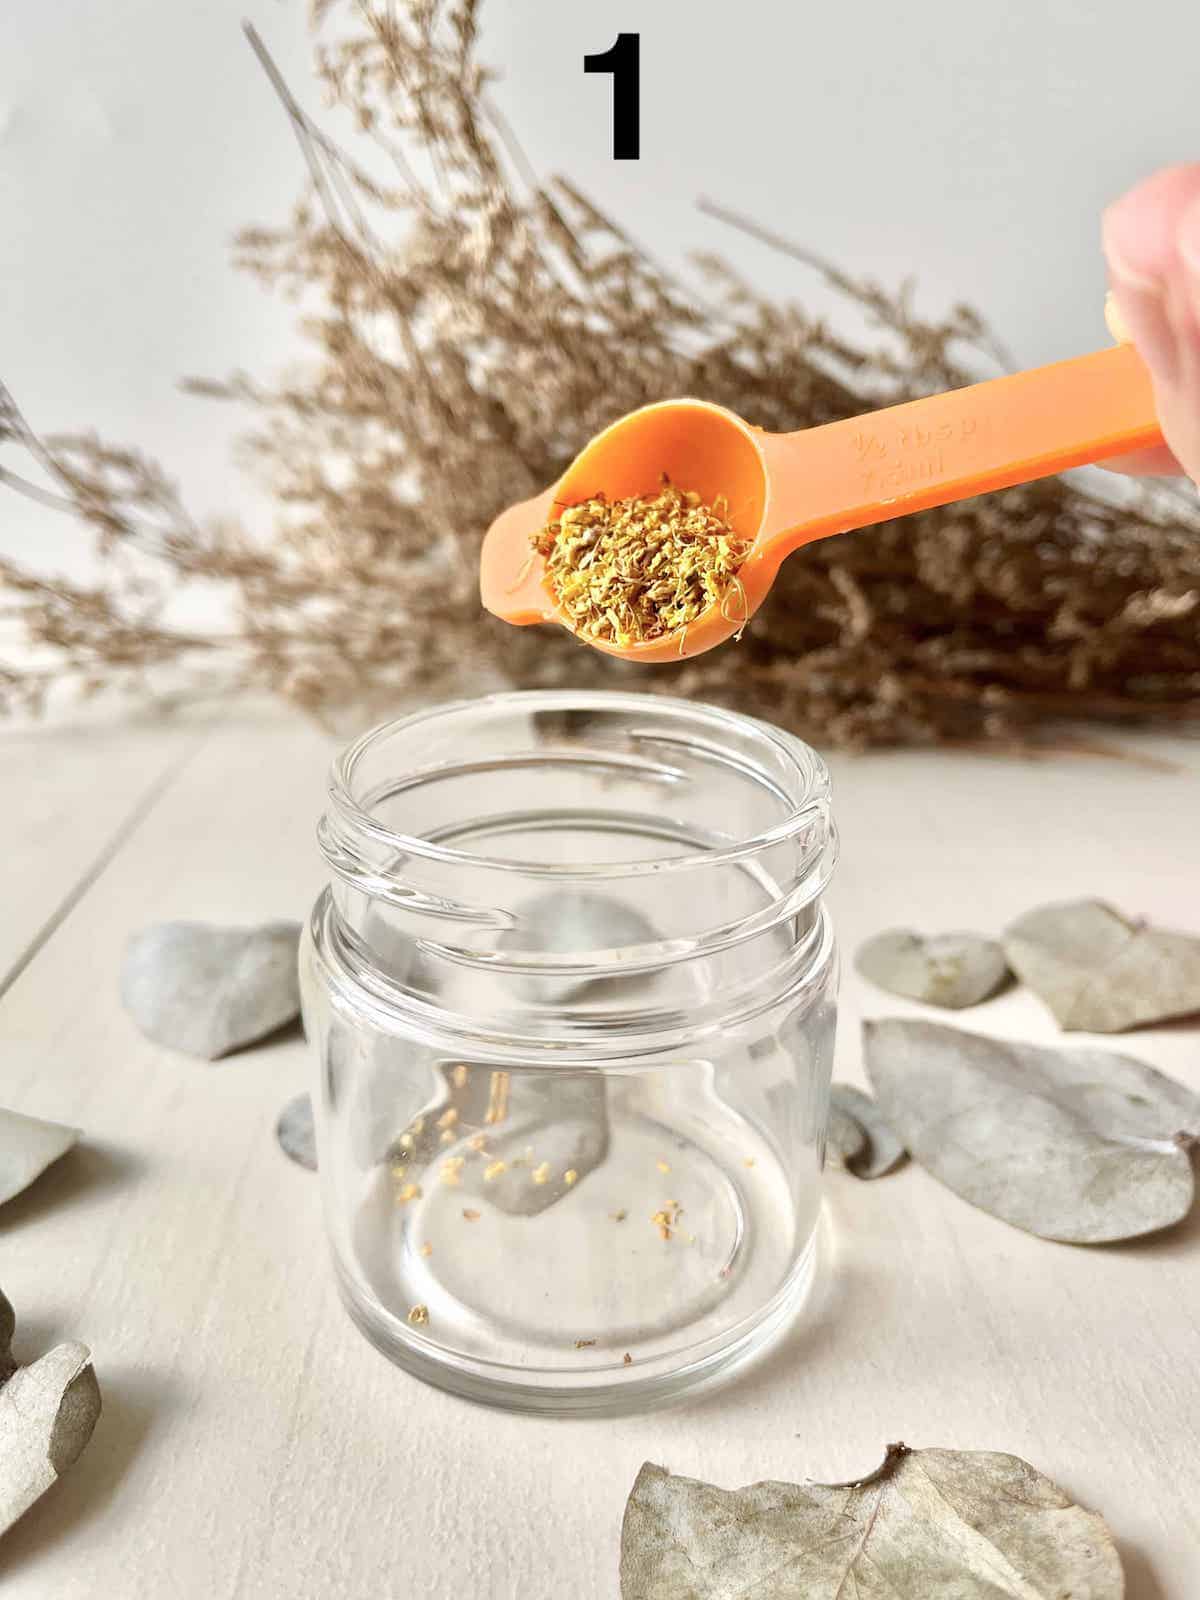 Pouring dried osmanthus flower tea into a glass cup.